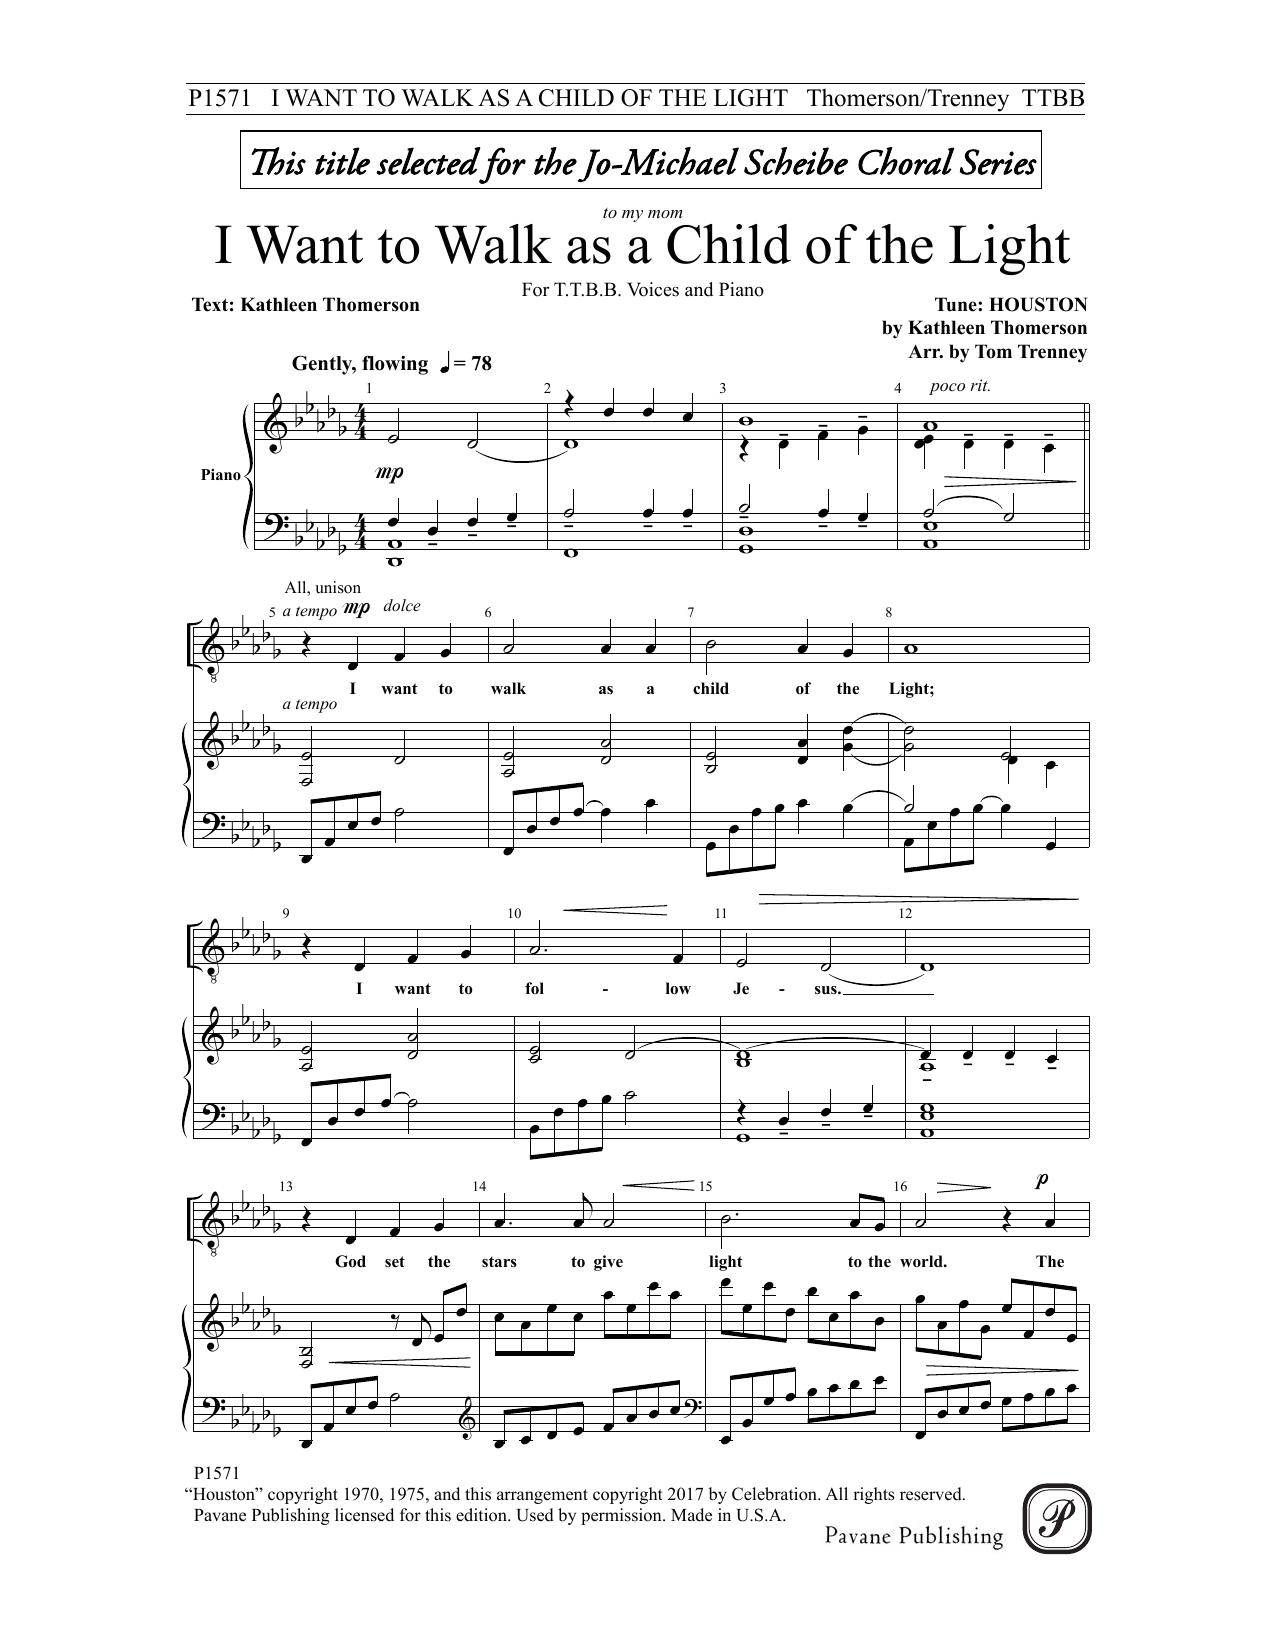 Download Tom Trenney I Want To Walk As A Child of Light Sheet Music